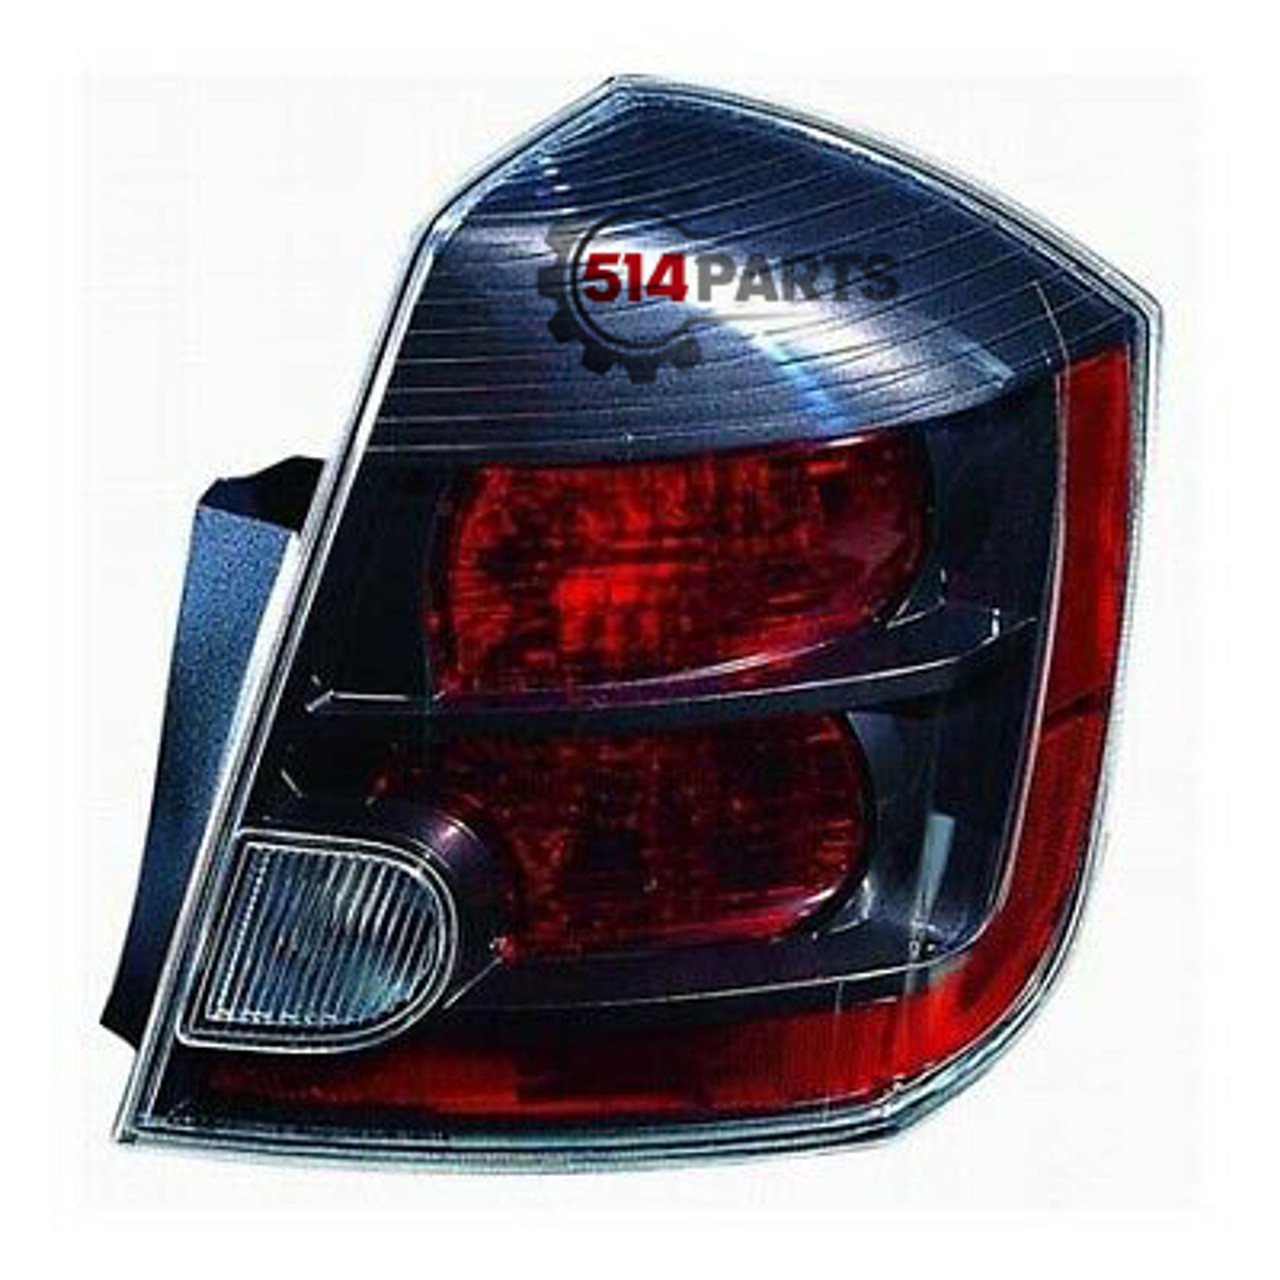 2007 - 2009 NISSAN SENTRA 2.5L TAIL LIGHTS High Quality - PHARES ARRIERE Haute Qualite